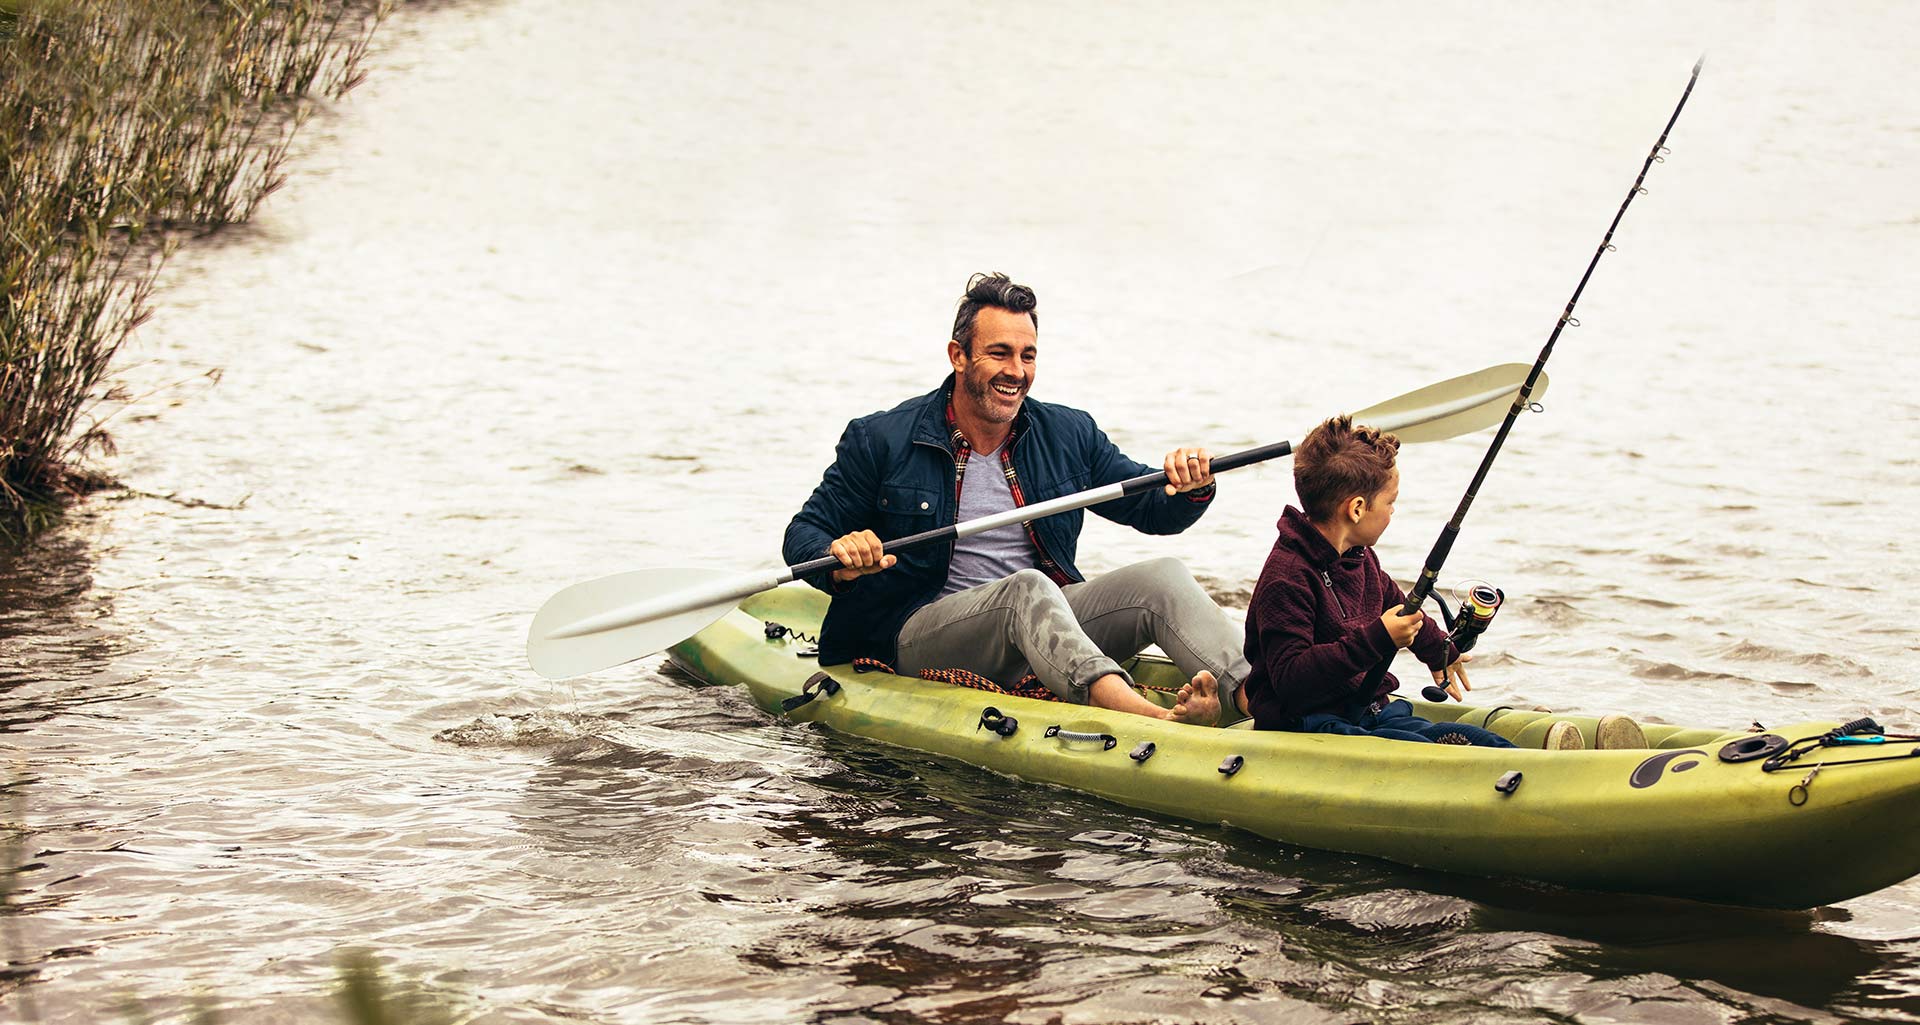 father and son on a canoe in a river